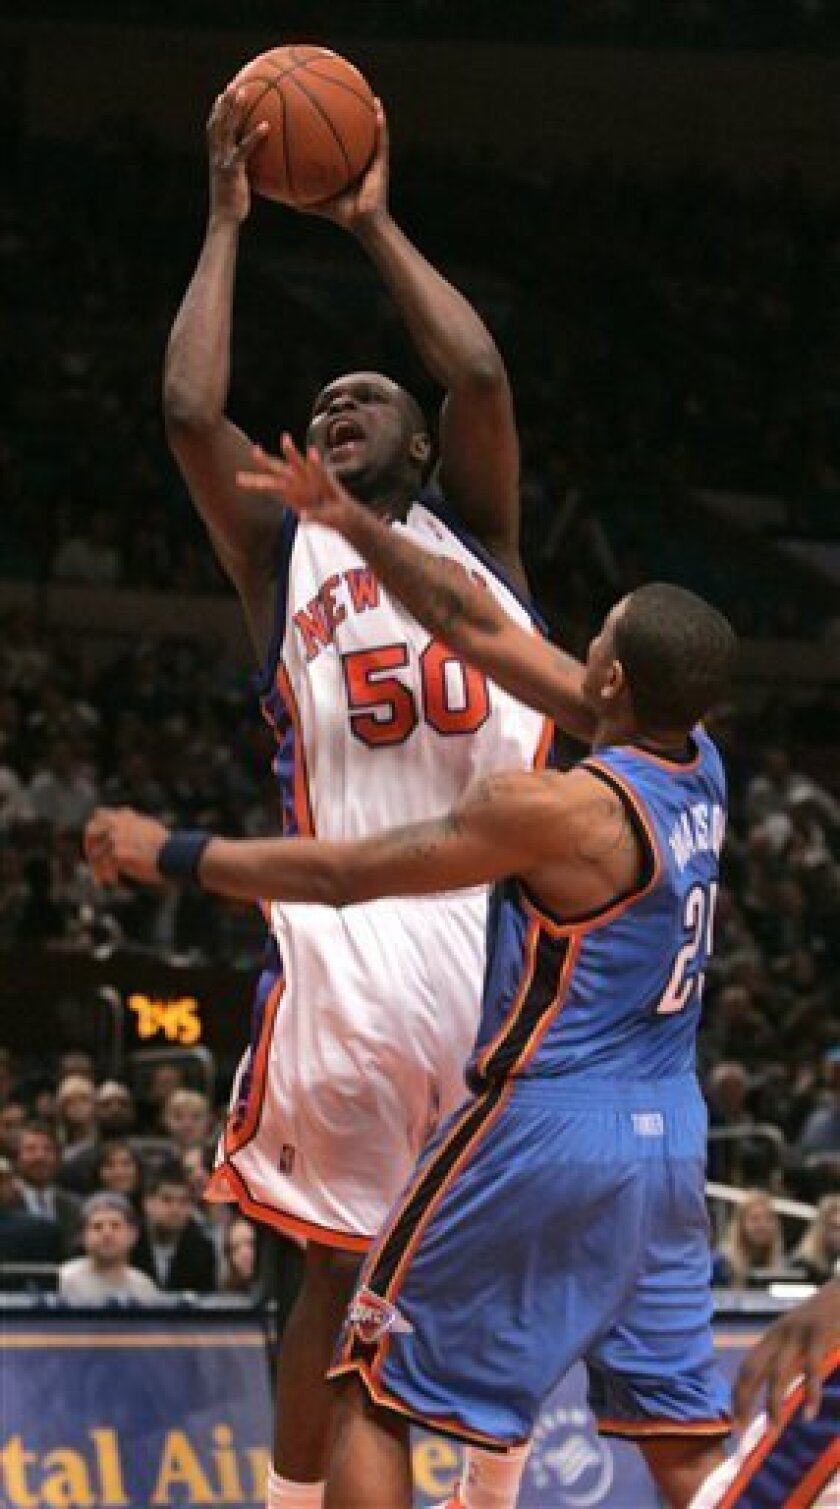 New York Knicks' Zach Randolph (50) shoots over Oklahoma City Thunder's Earl Watson (25) during the first half of an NBA basketball game Friday, Nov. 14, 2008 at Madison Square Garden in New York. Randolph scored 20 points as the Knicks won 116-106. (AP Photo/Frank Franklin II)